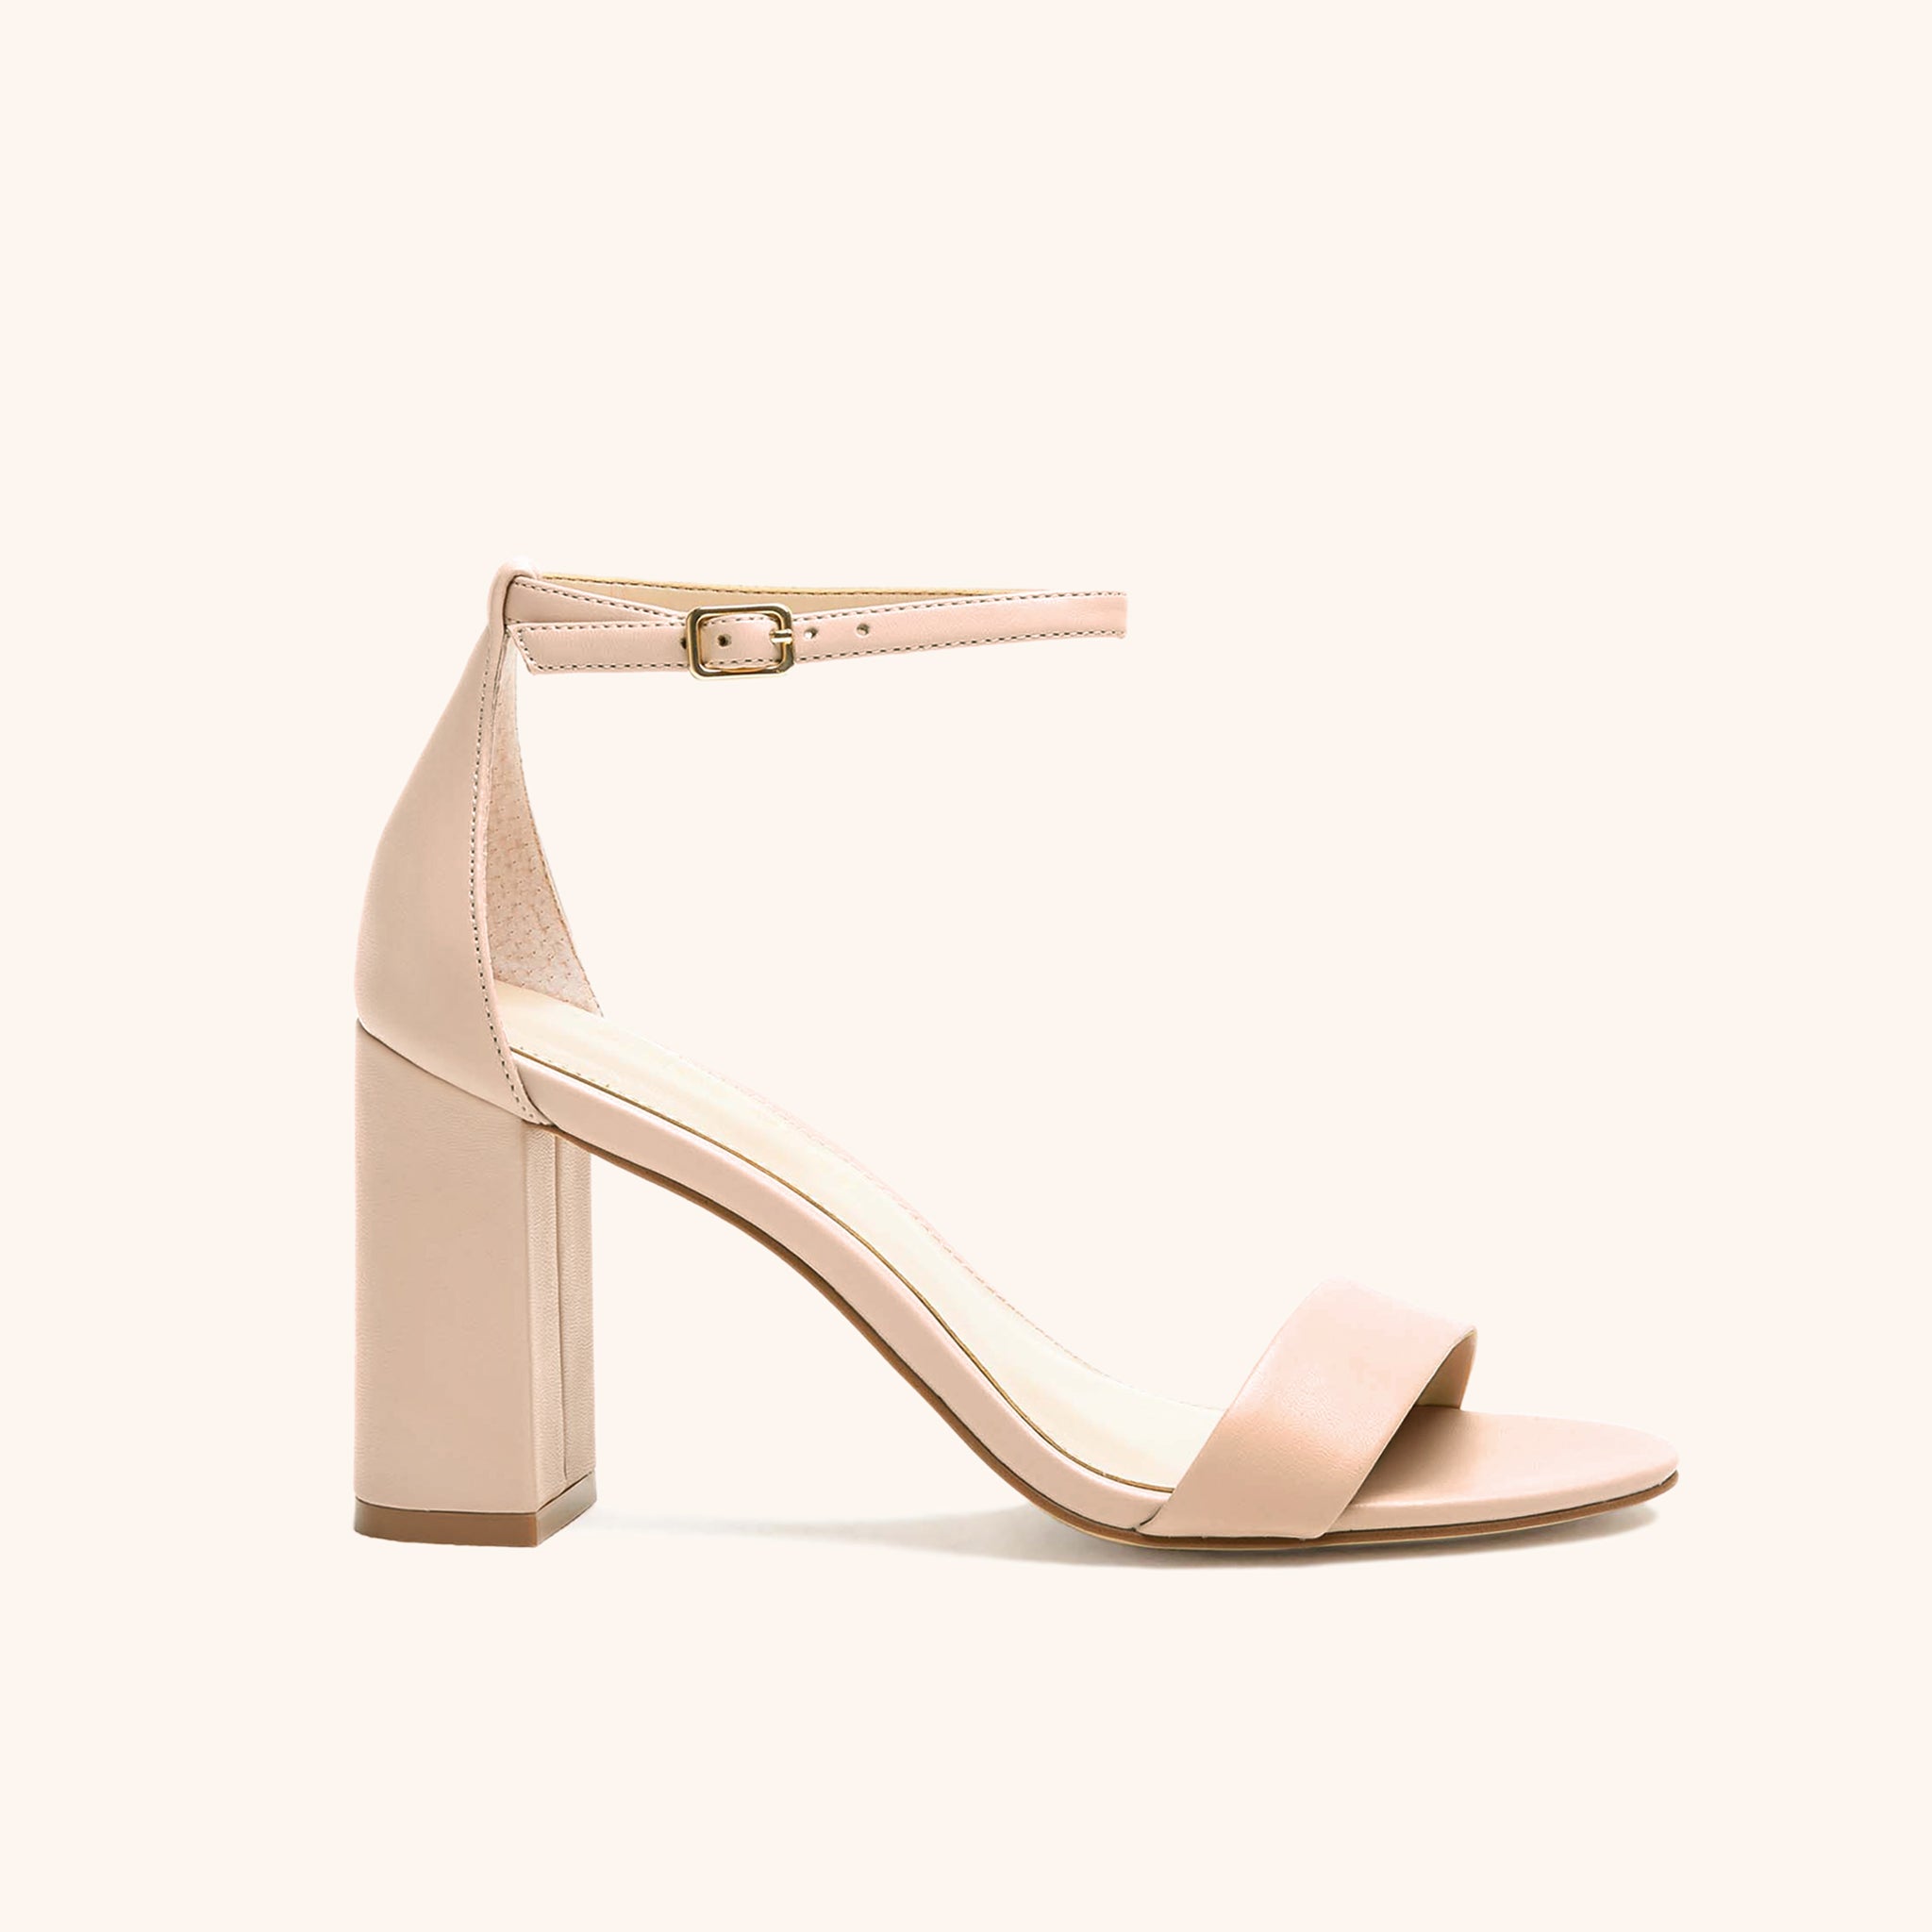 𝐍𝐎𝐓𝐓𝐘𝐔𝐇  Heel sandals outfit, Shoes outfit fashion, Chunky